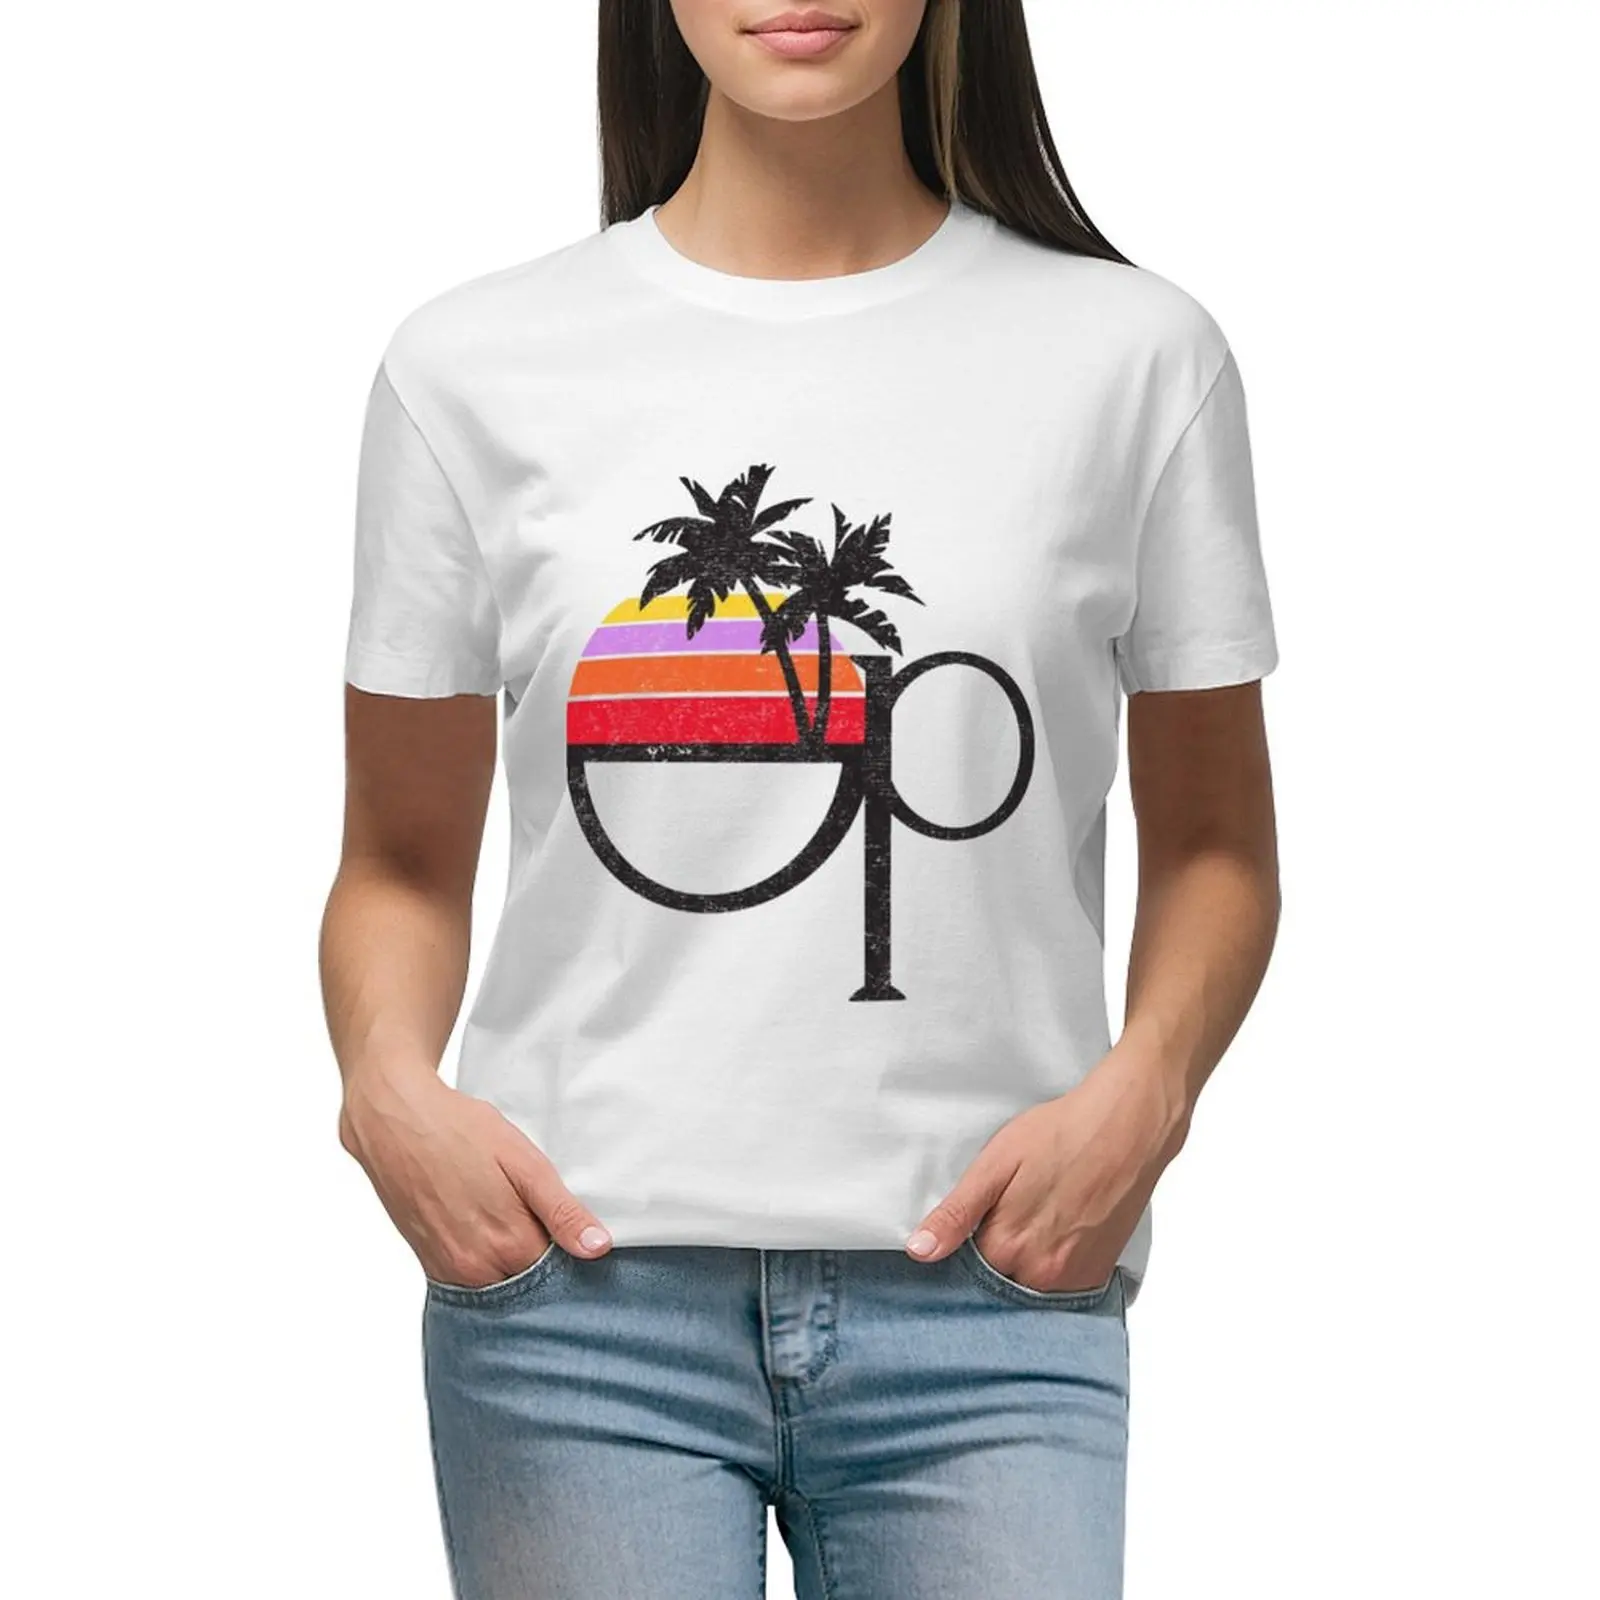 

Ocean Pacific OP Vintage Distressed 80s Eighties Classic T-shirt tees summer tops cropped t shirts for Women